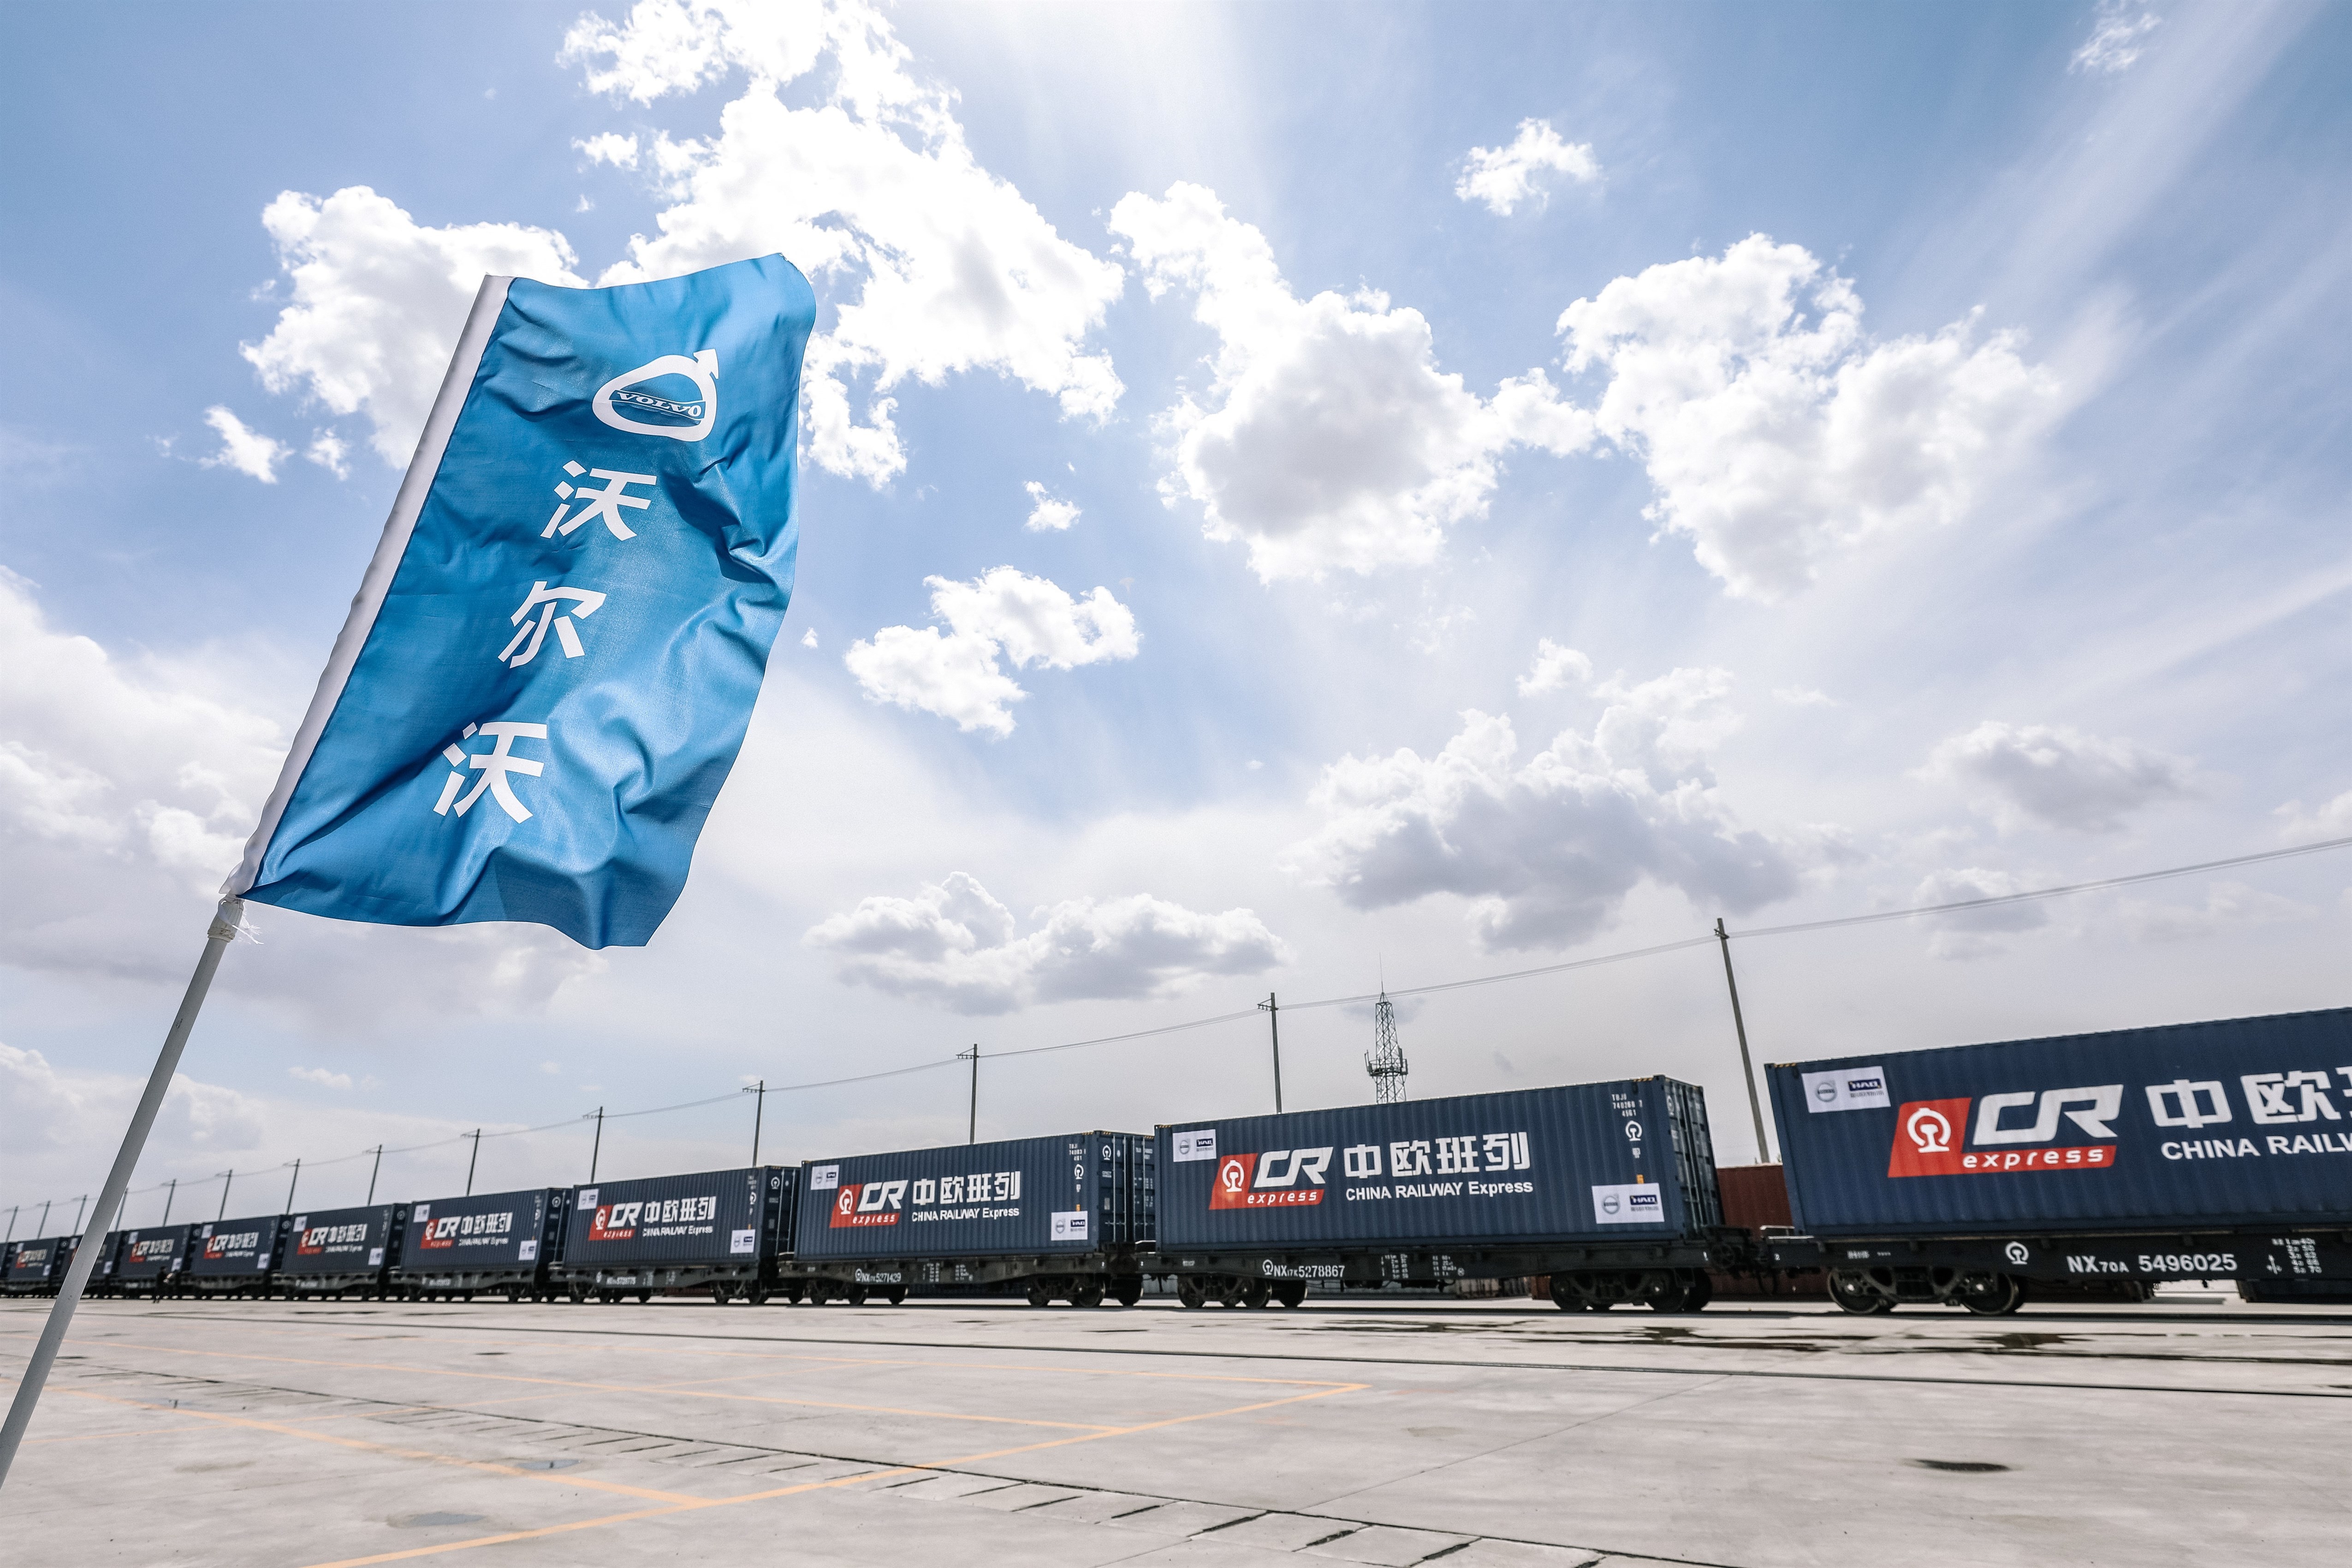 Beijing is using the “Belt and Road Initiative” to plough more than HK$1.72 trillion into an infrastructure investment network stretching across four continents.